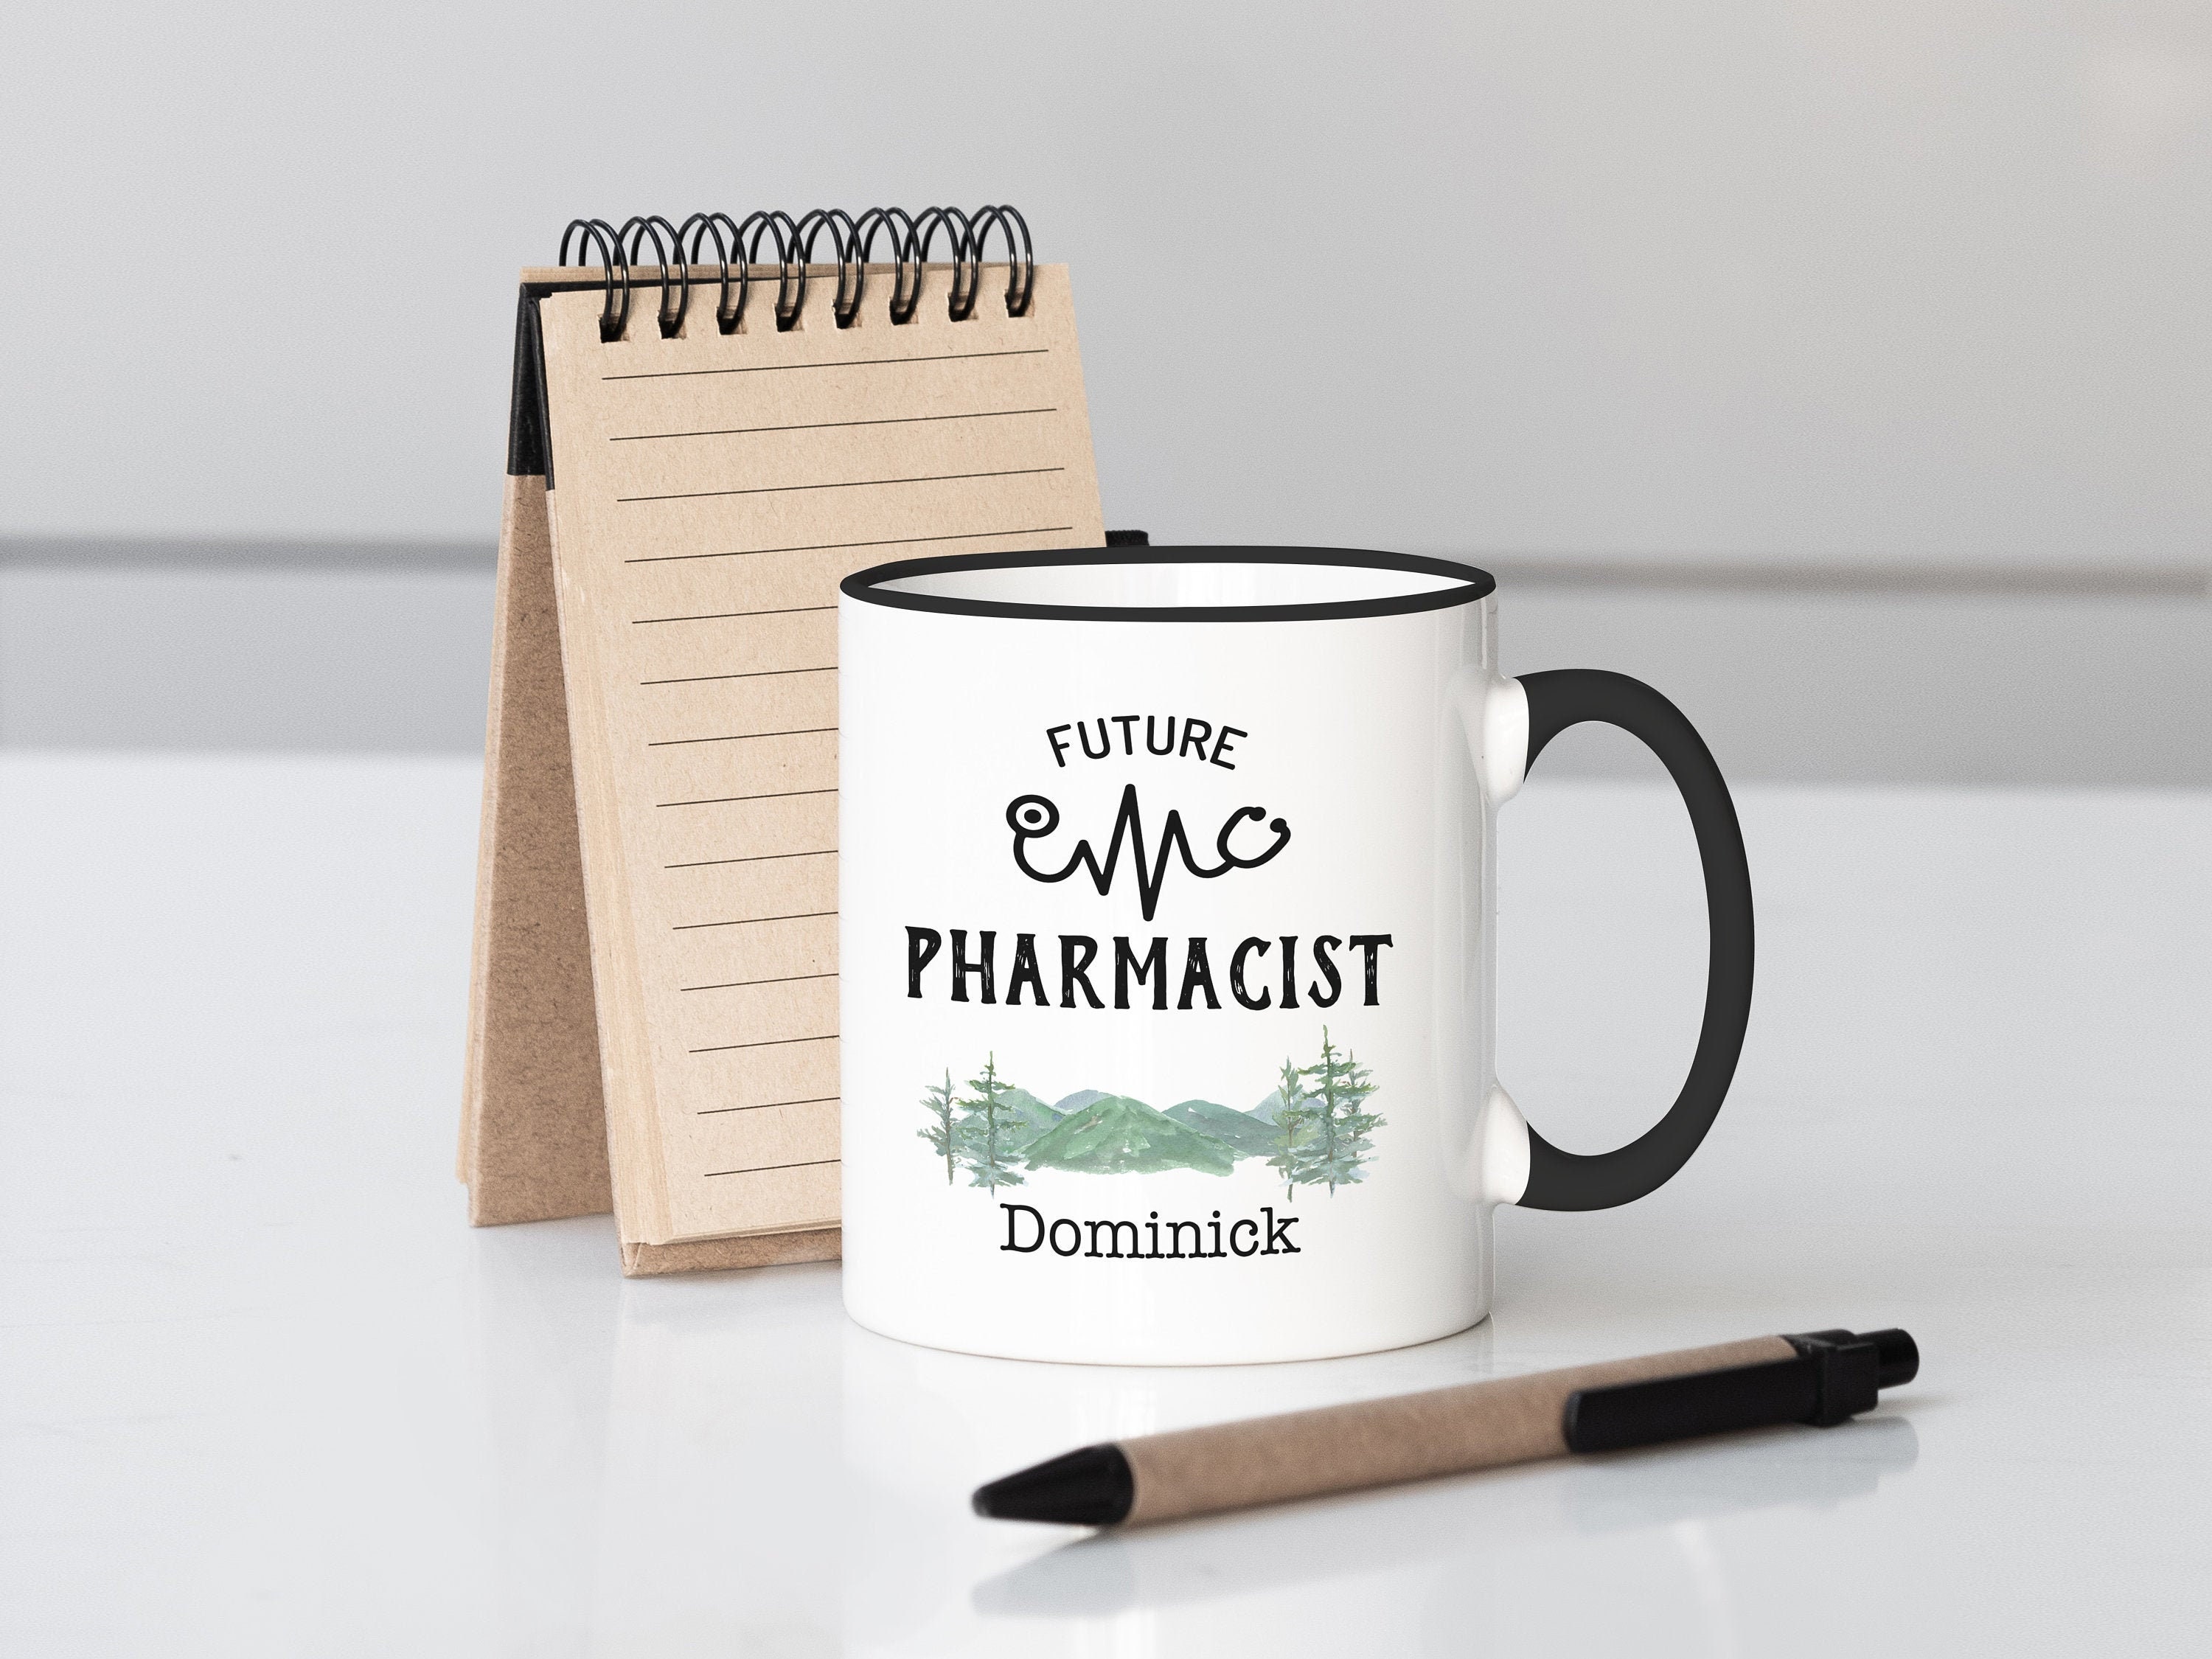 Pharmacy graduation gifts for him